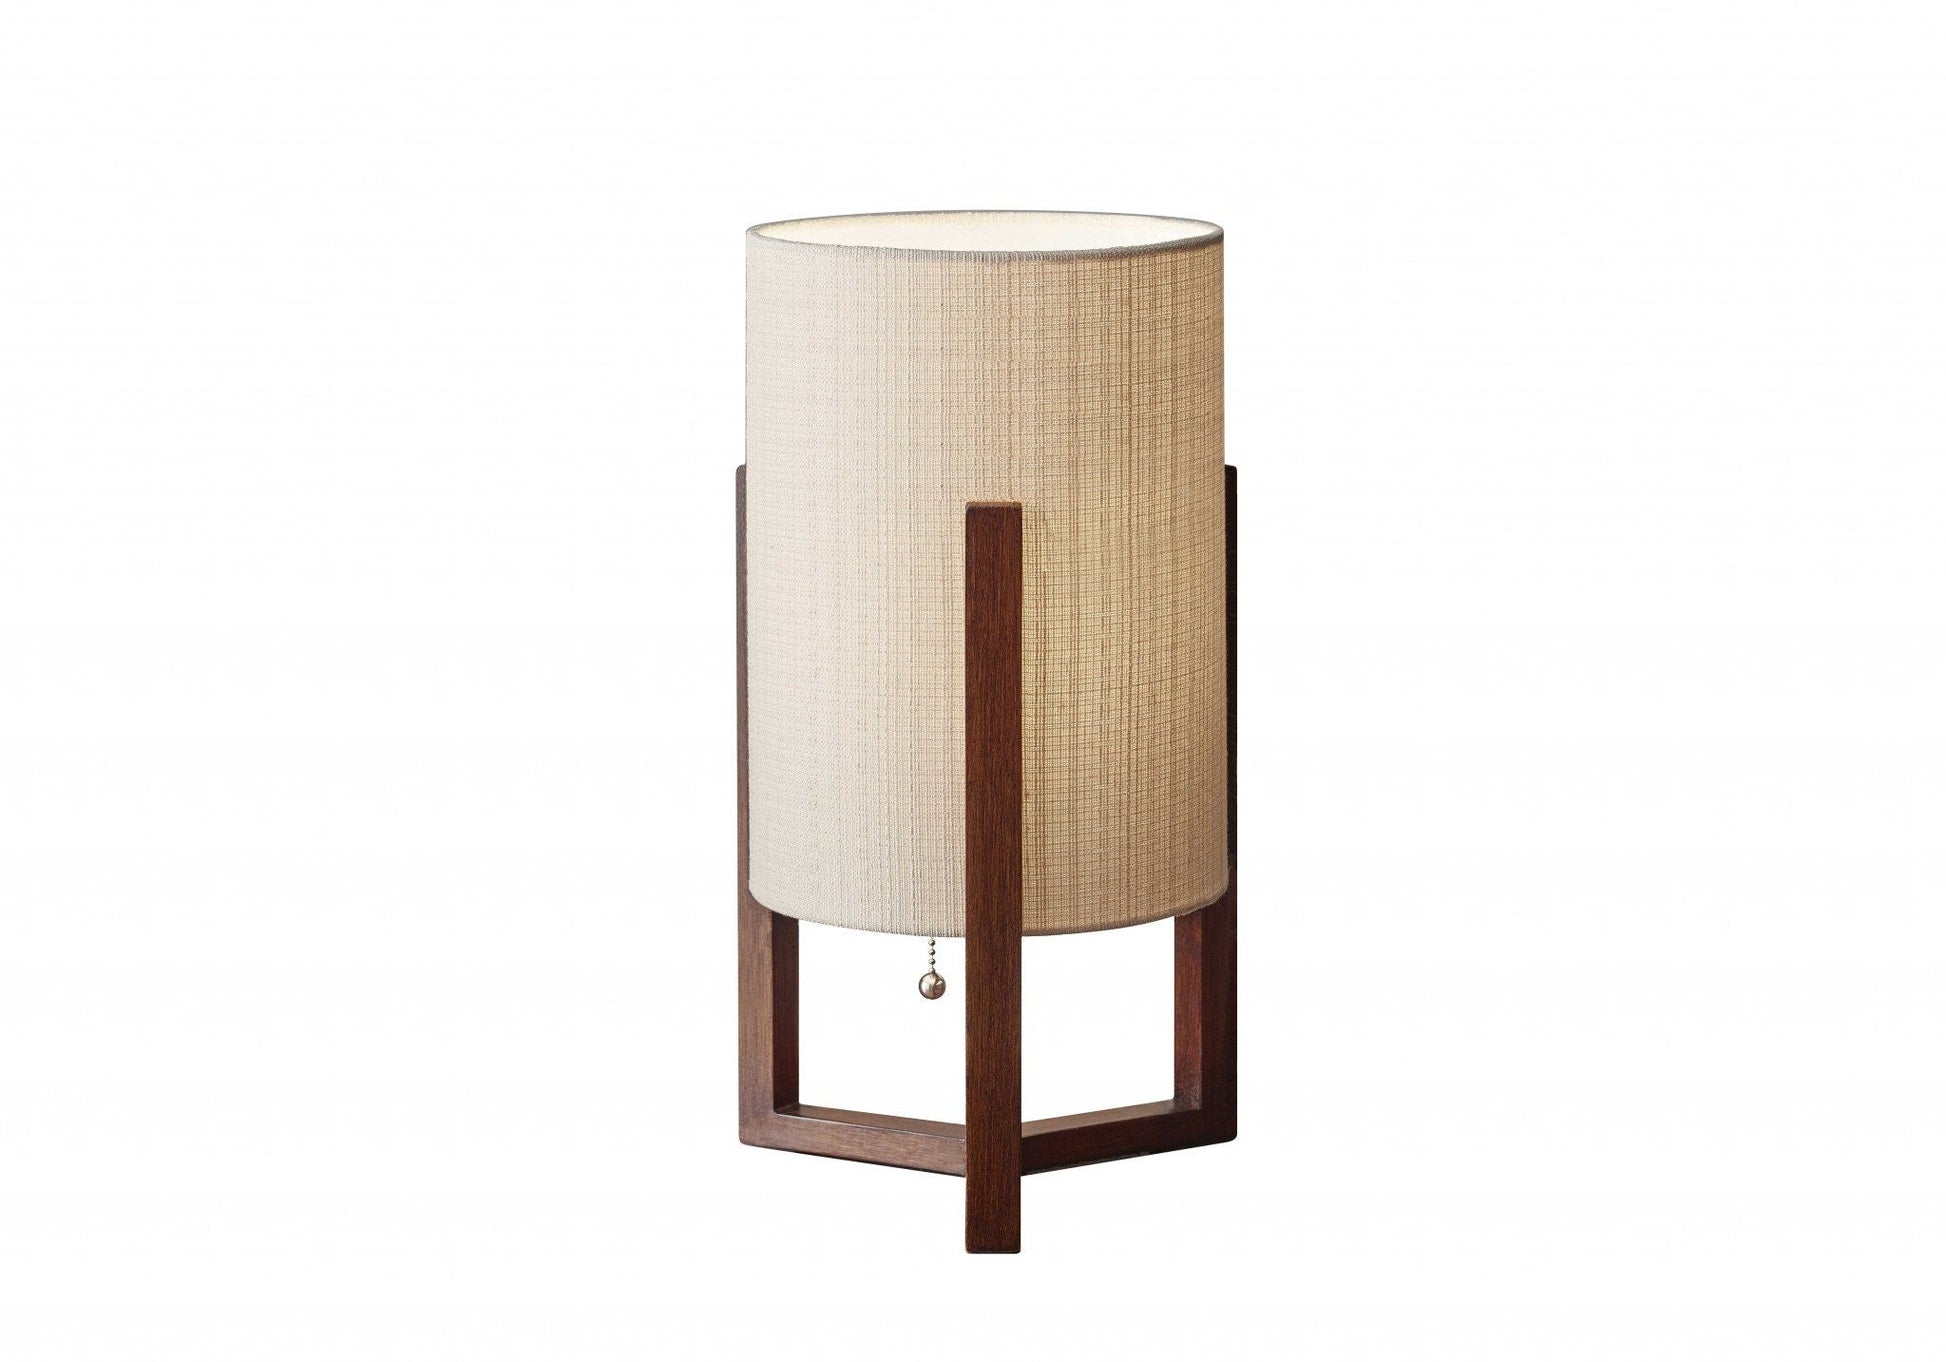 Wood Cylindric Table Lamp With Linen Shades | Walnut Birch Wood, Mid Century Table Lamp, Japanese, Scandinavian, Desk Lamp, Bedside Light - TABLE LAMP -